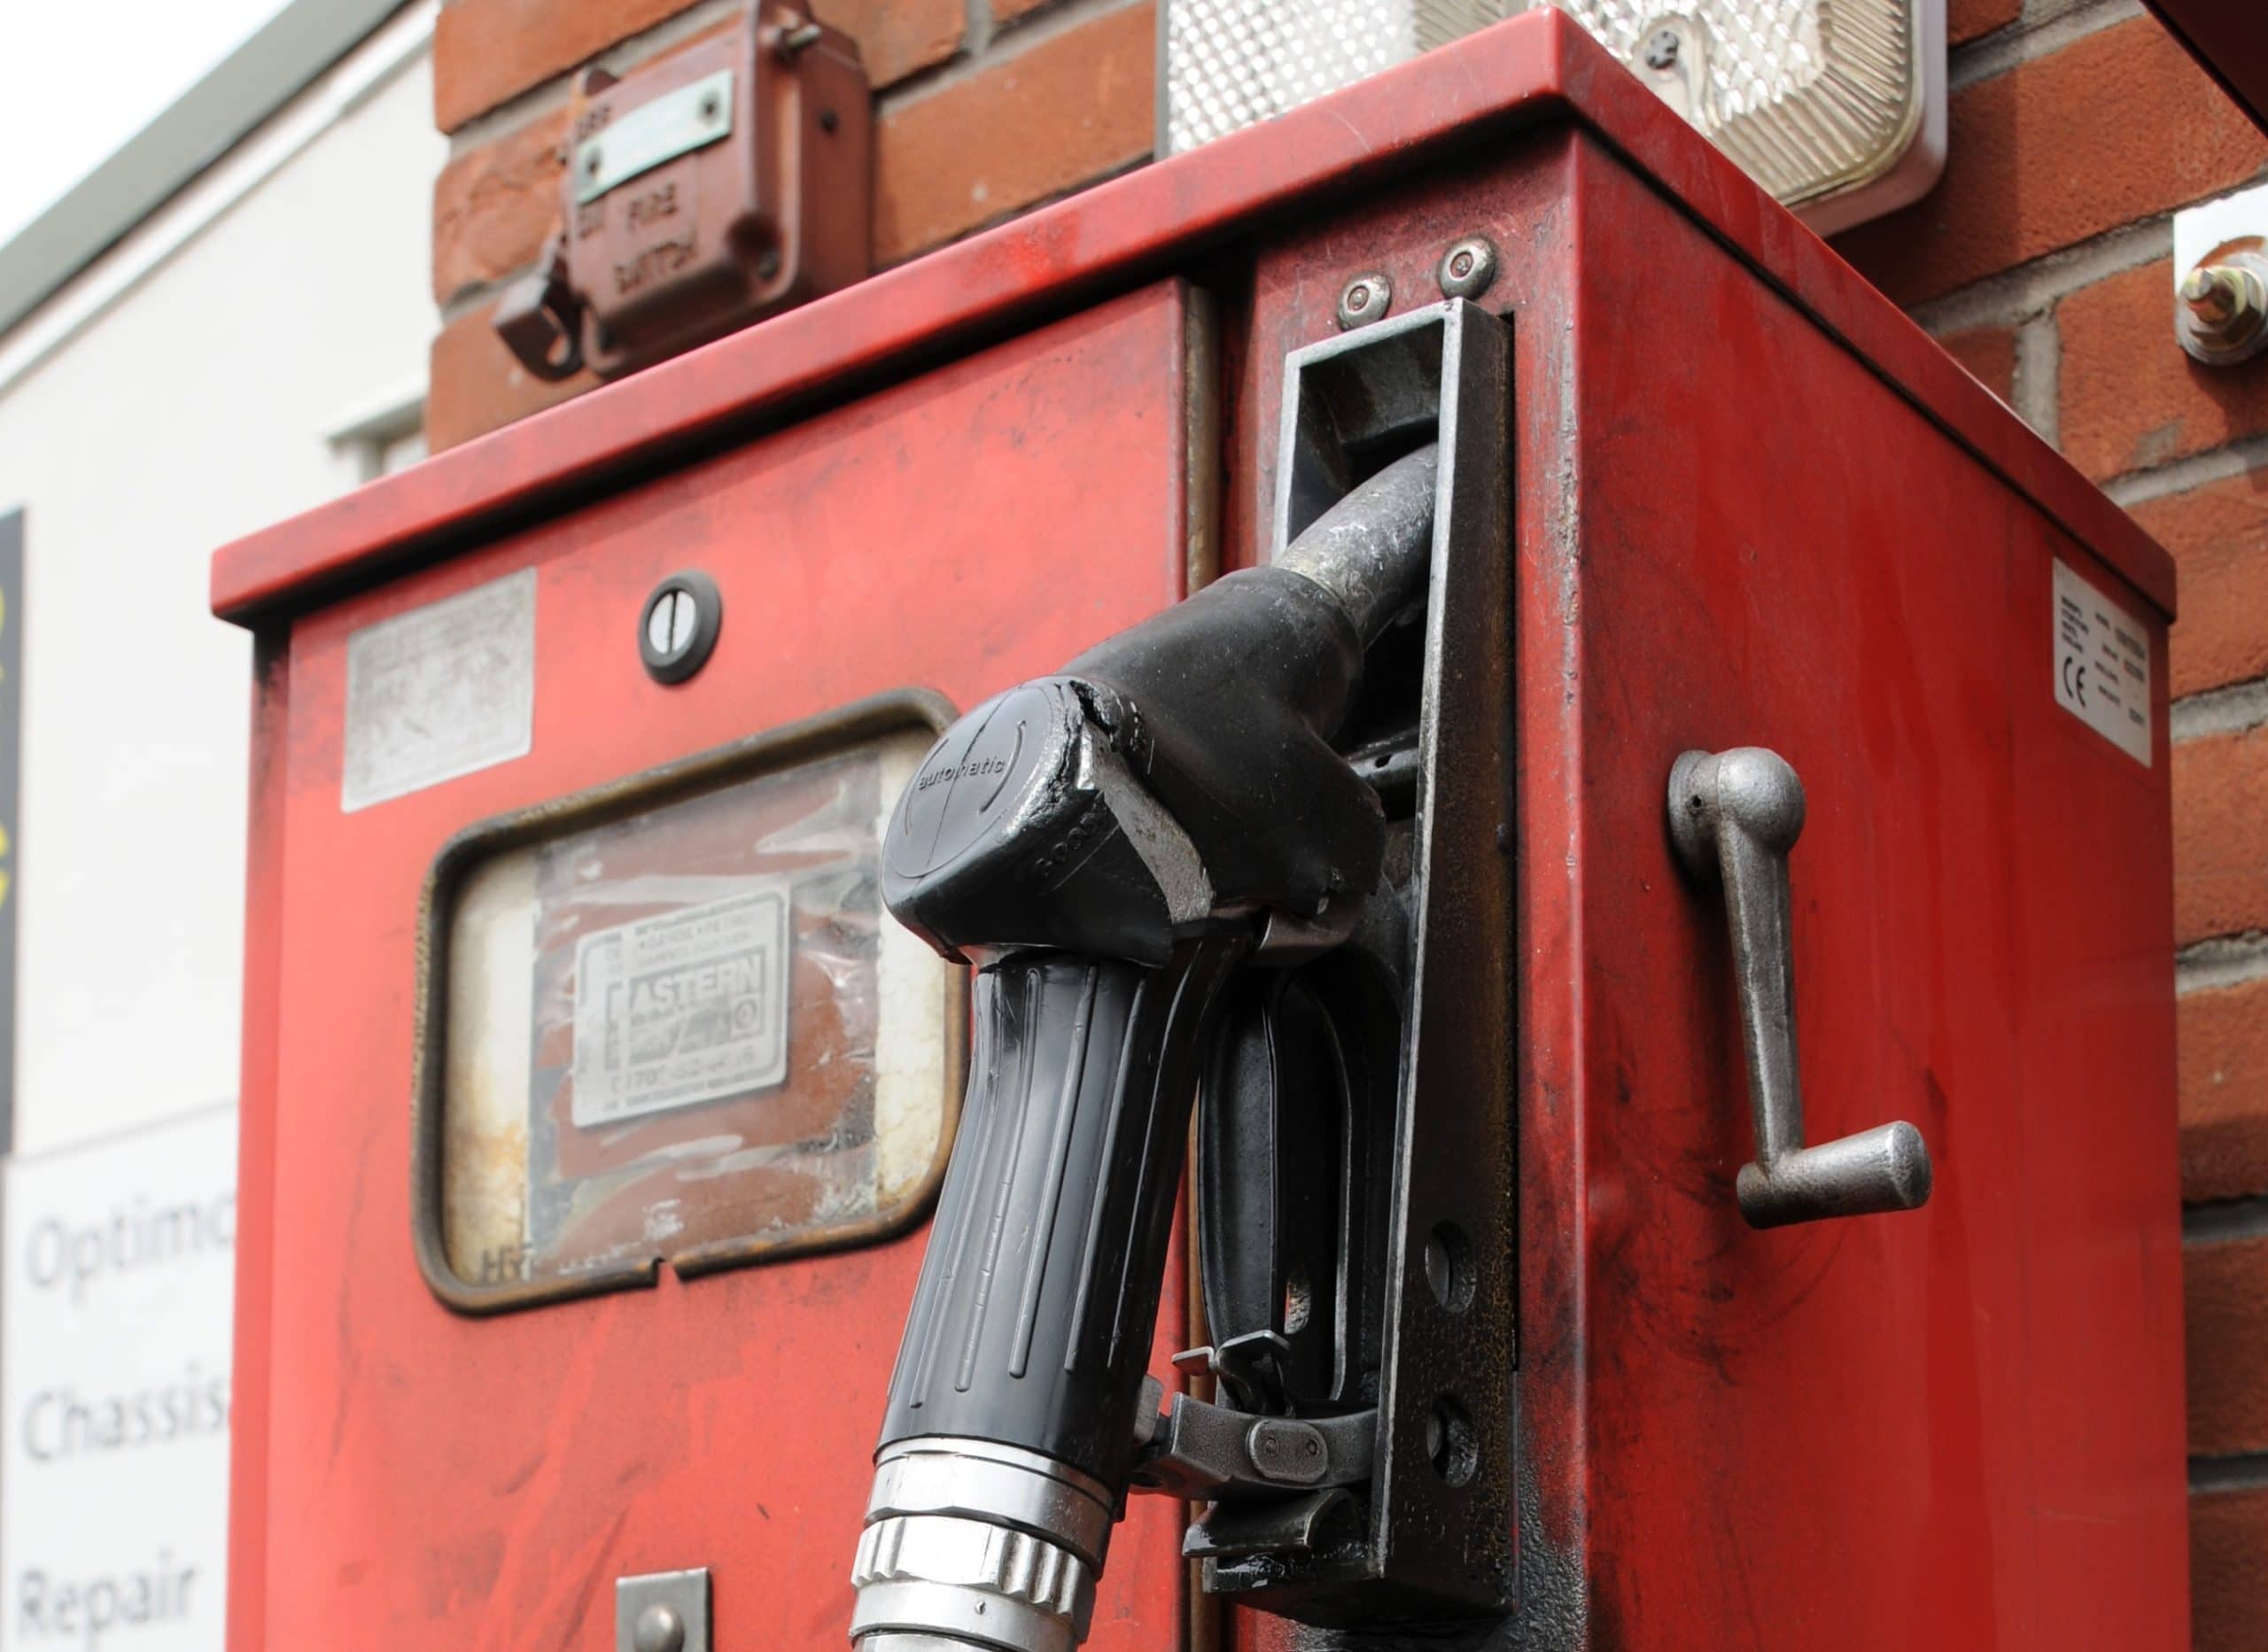 Bulk diesel prices continue to rise as supply pressures evident